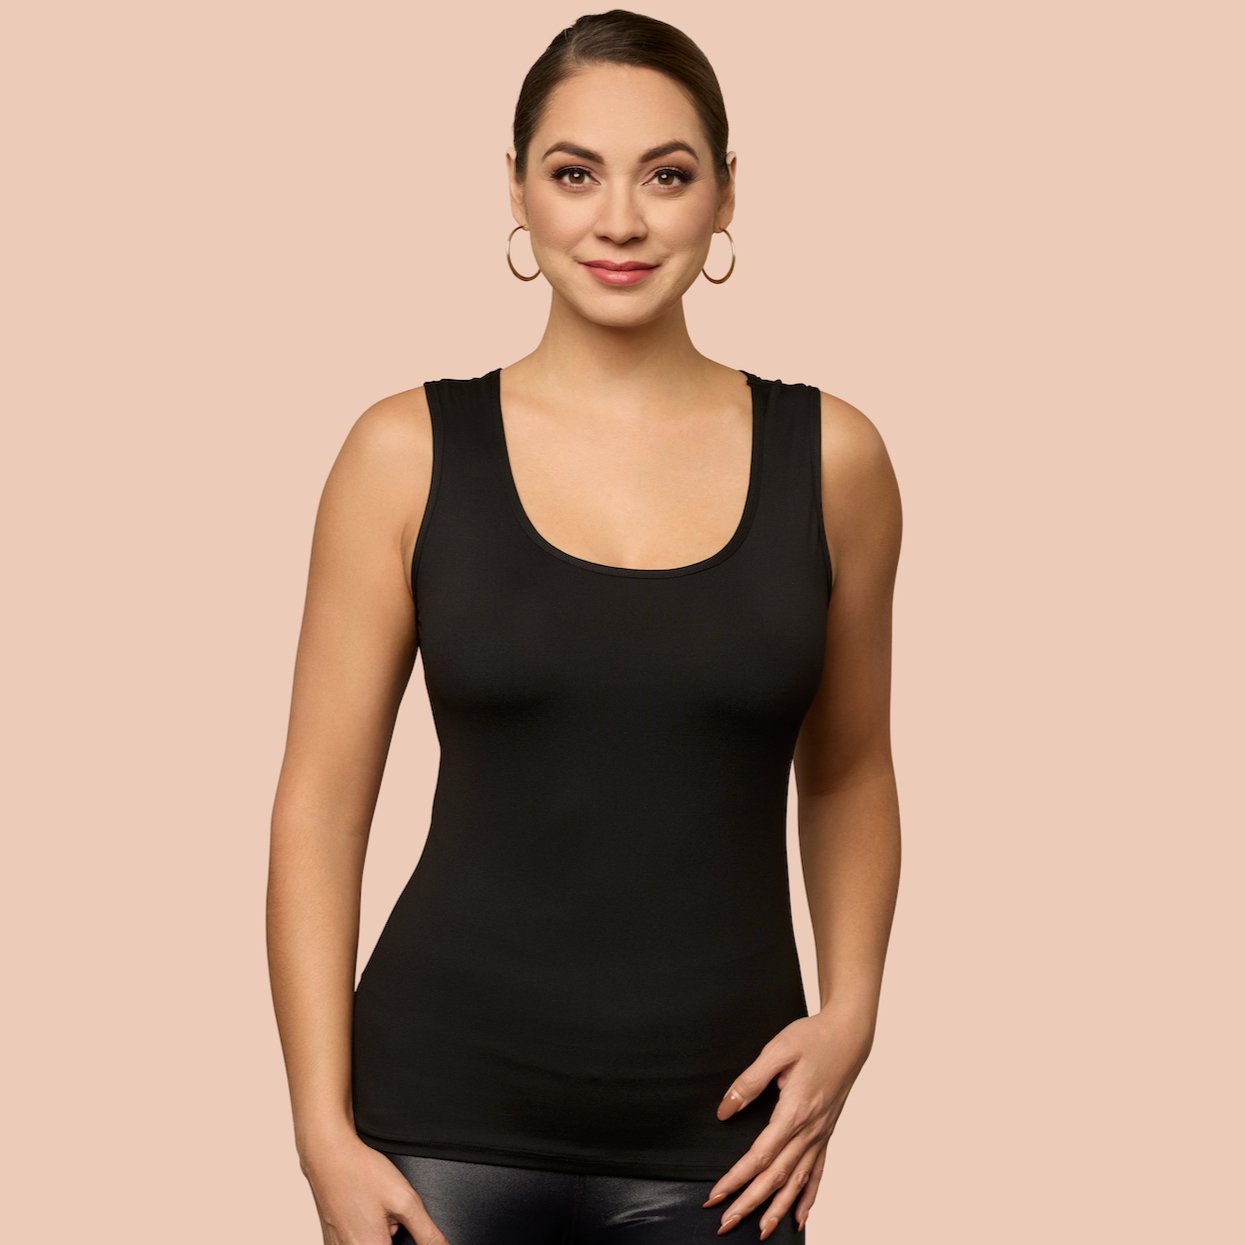 Women's Backless Camisole Top With Thin Straps, Built-in Bra And Anti-slip  Design